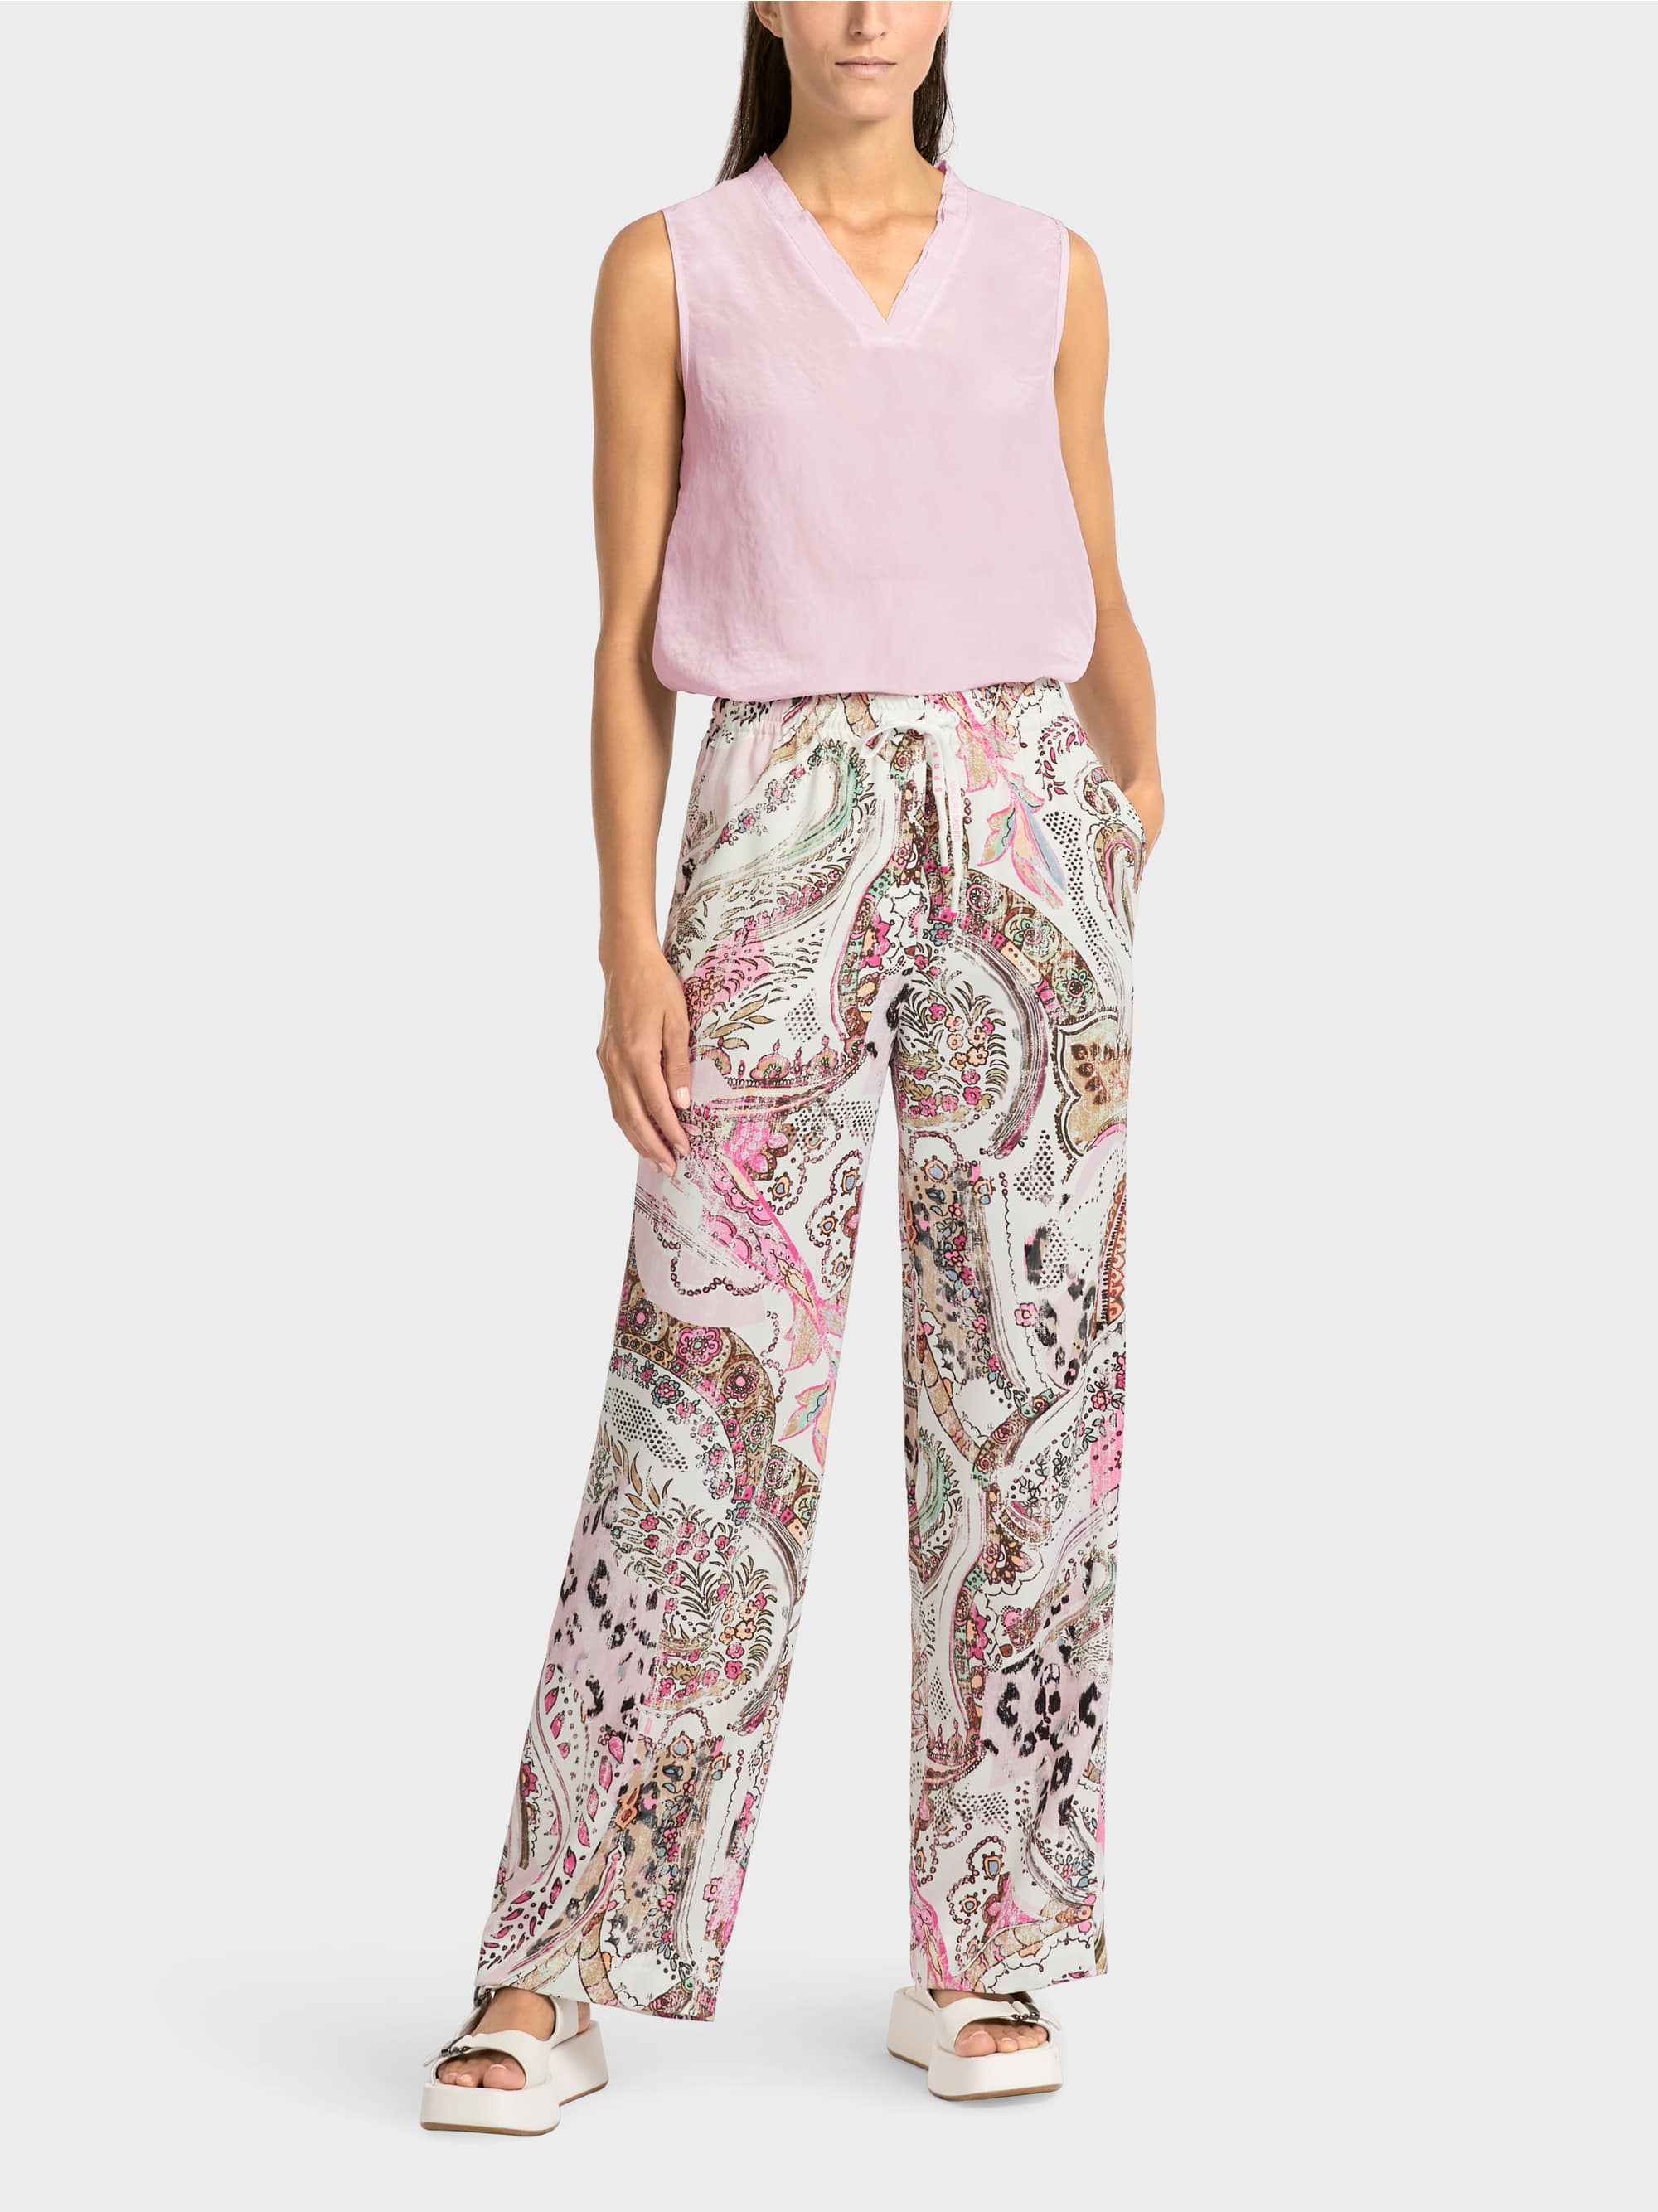 Paisley Print Relaxed Fit Trousers